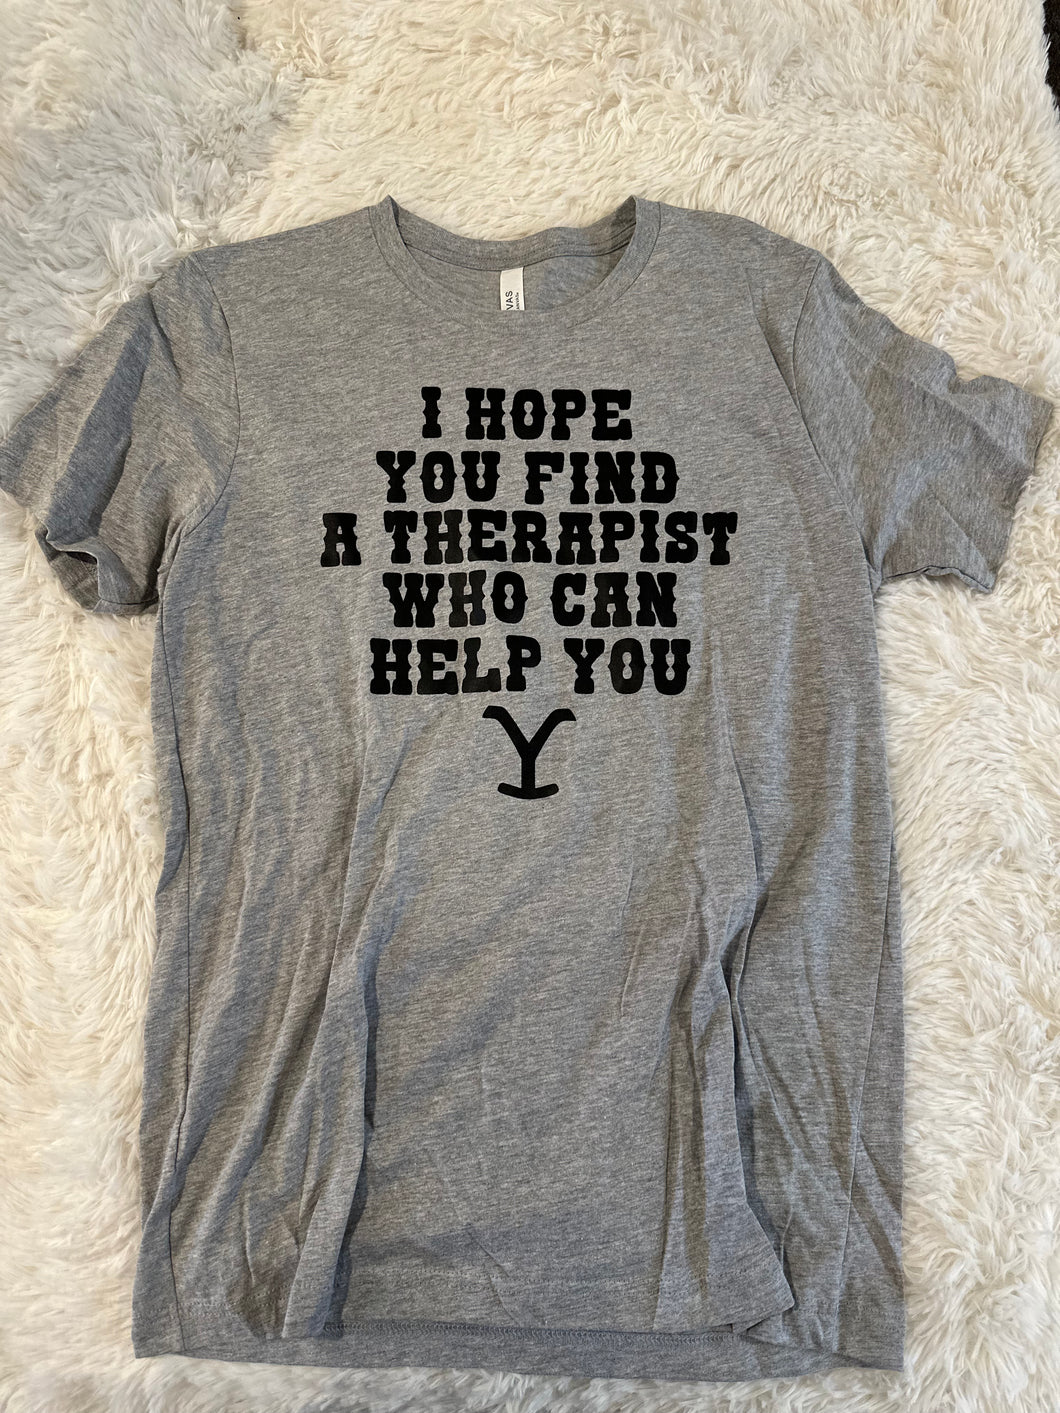 I Hope you can find a therapist T-Shirt - Medium